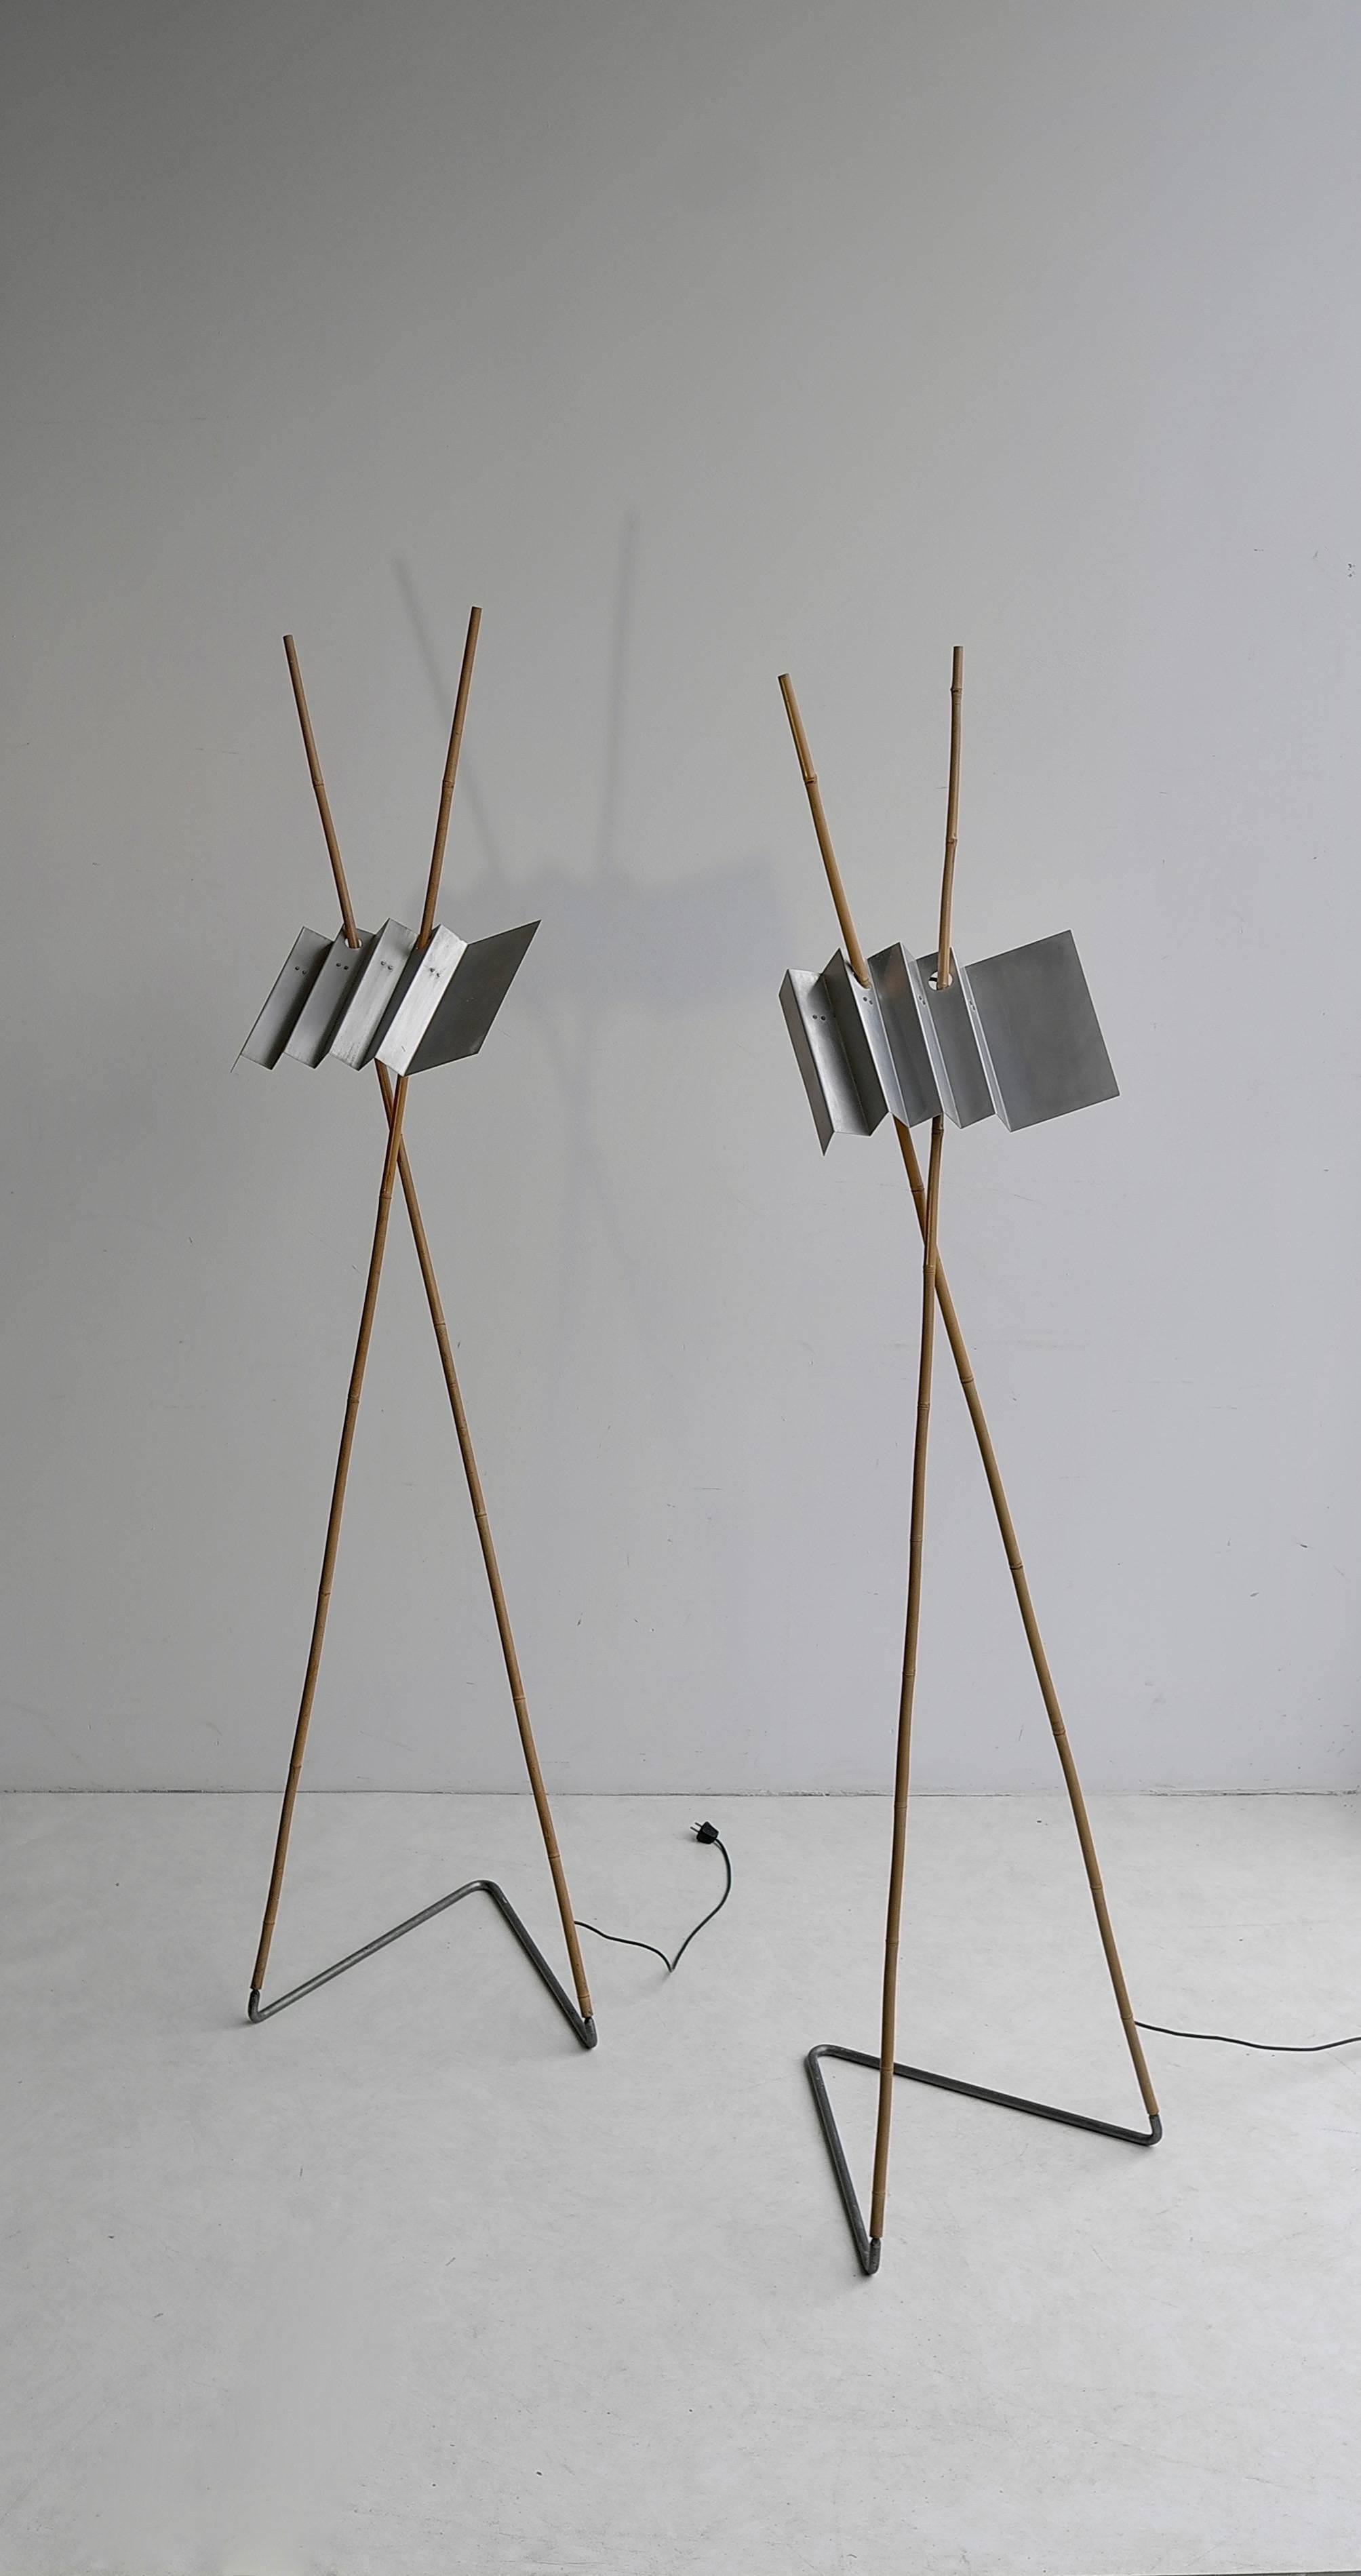 When Anke Kamerman designed this lamp she was inspired by a bamboo fishing-rod that she had found. The aluminium shade is referring to a corrugated iron roof that was on her house when she was living in Tanzania.
Anke Kamerman not only designed